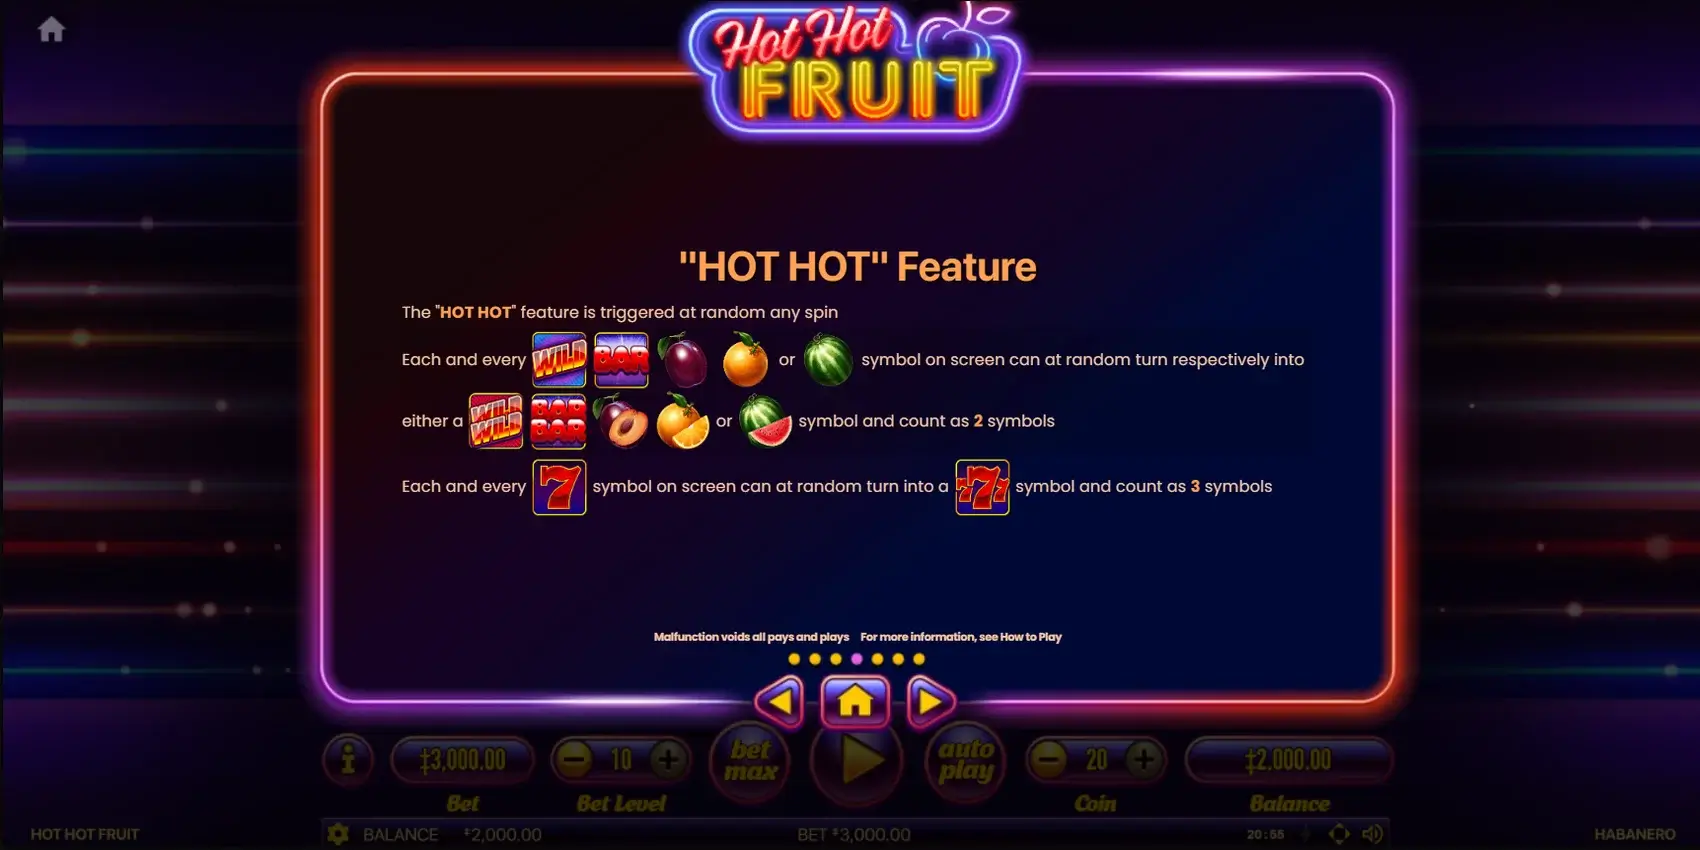 Hot Hot Fruit slot game features